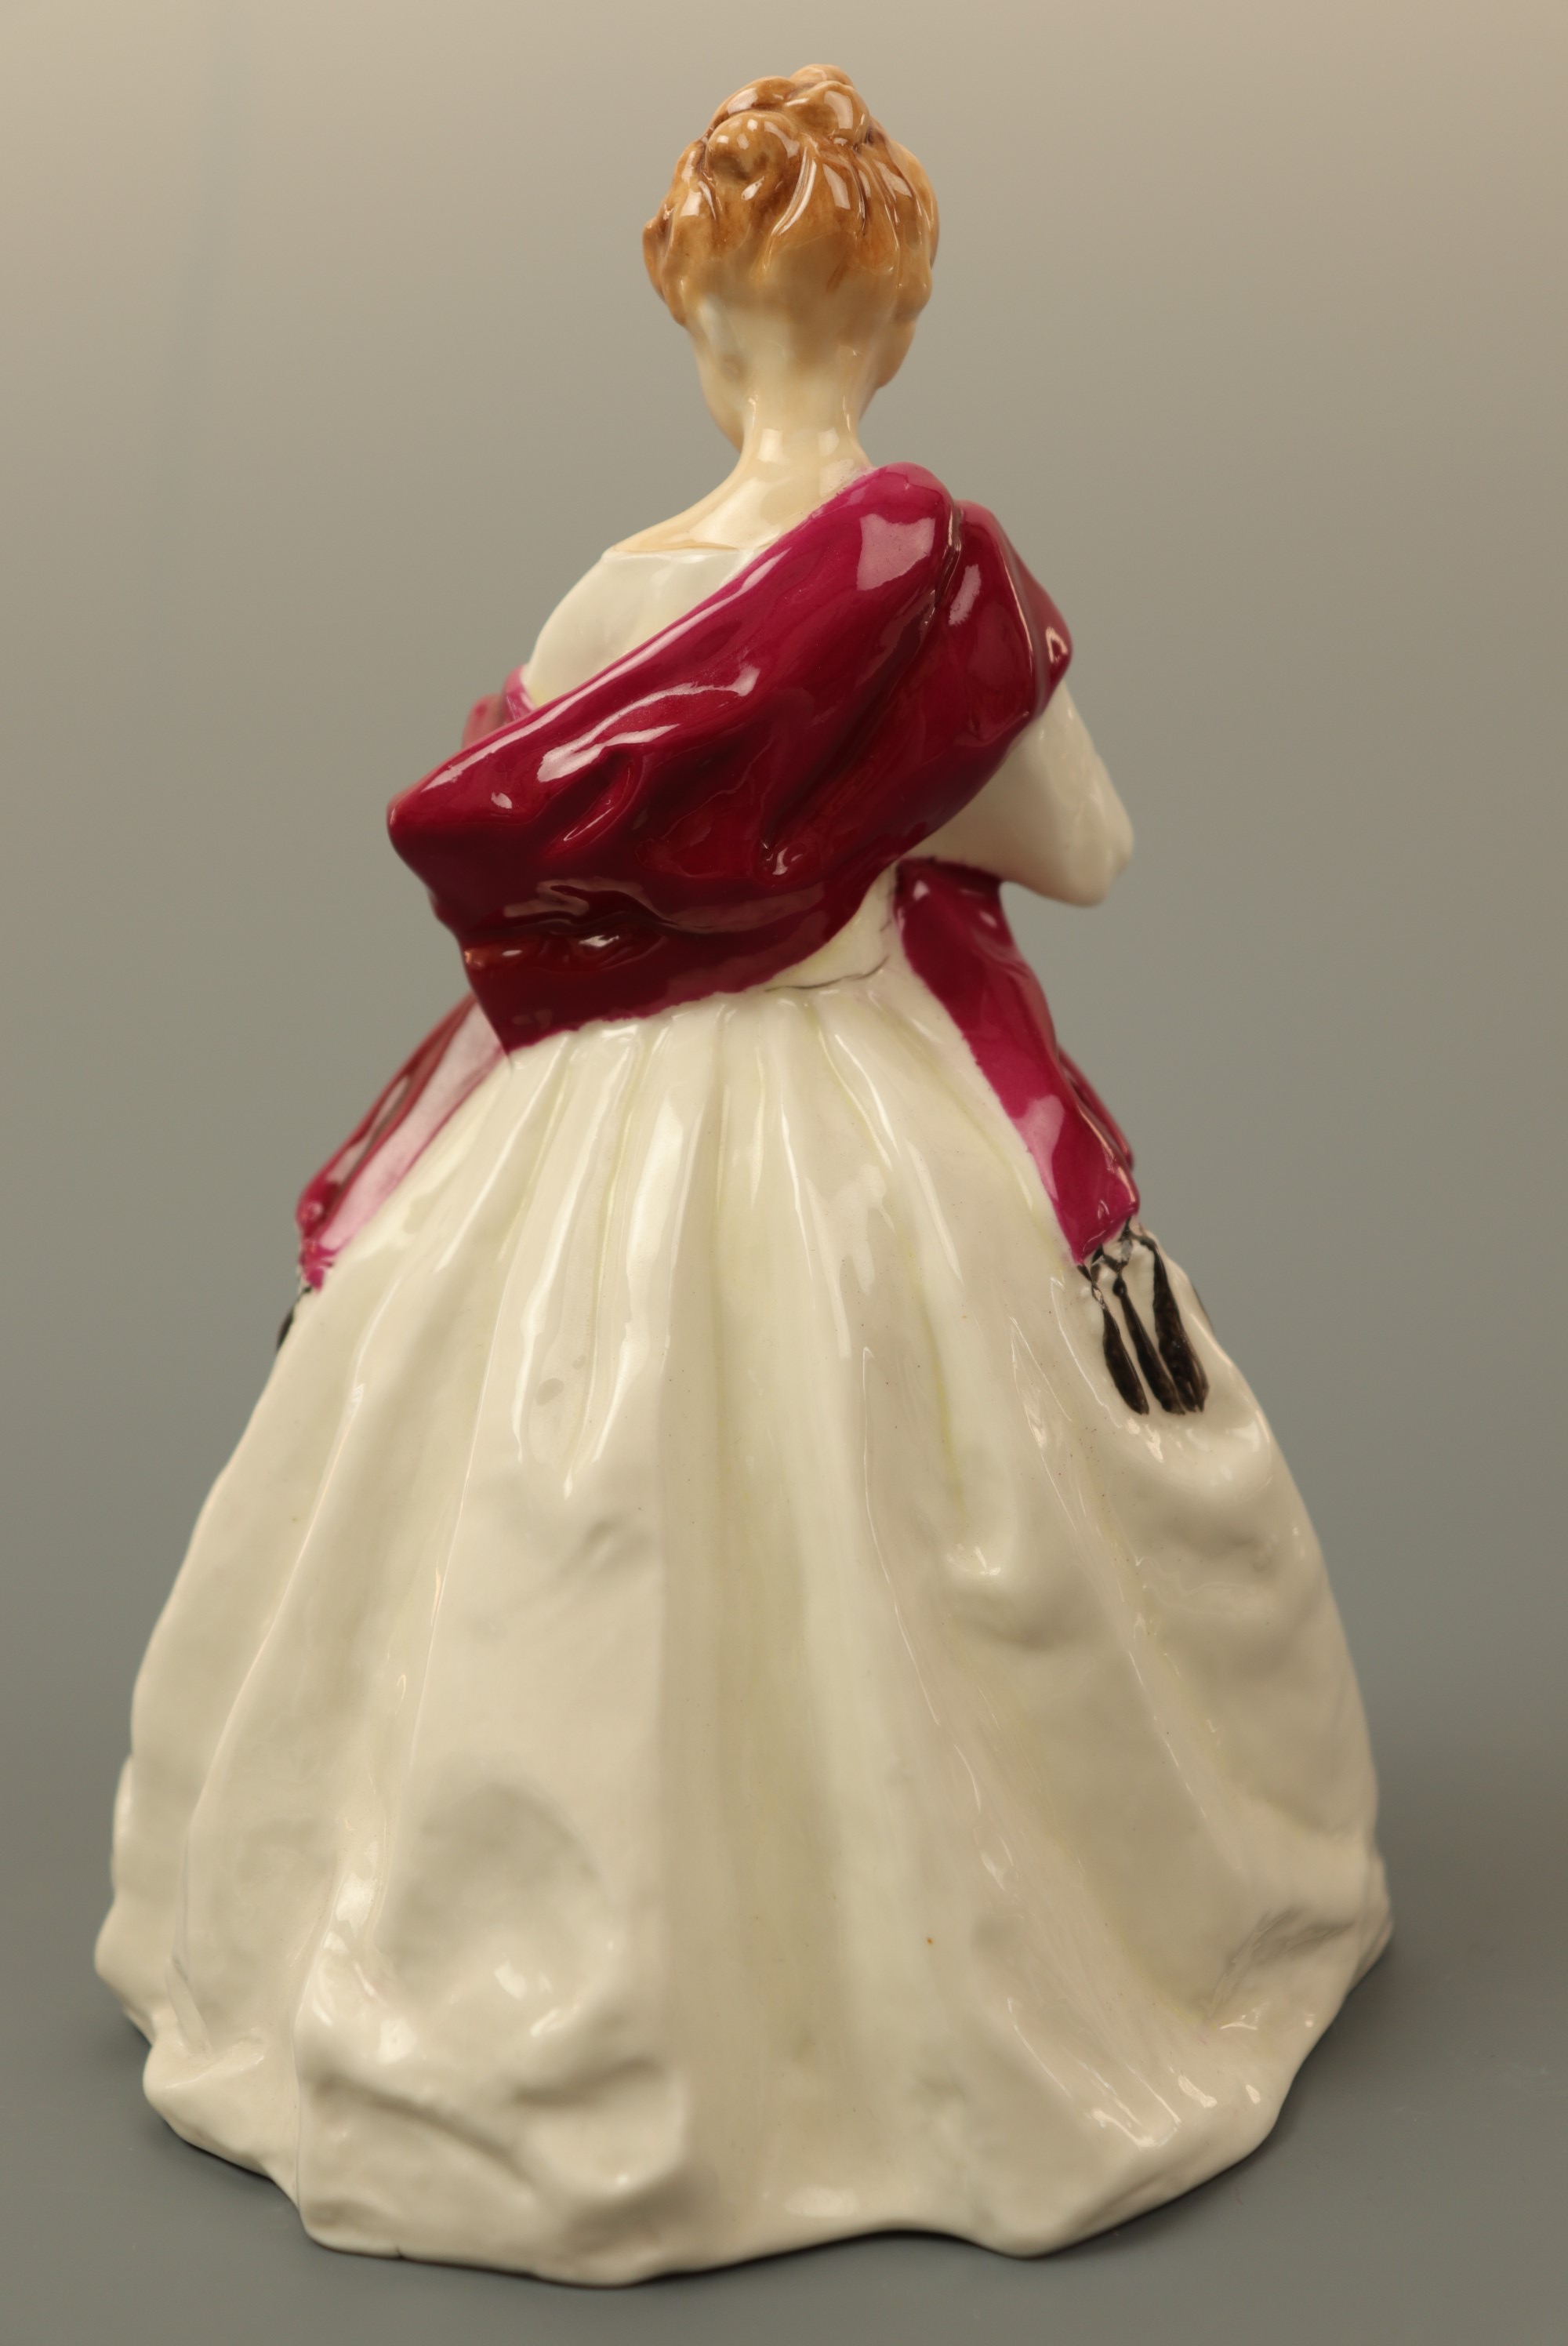 A Royal Worcester Figurine "The First Dance" modelled by FC Doughty 3629, 18 cm high - Image 2 of 2